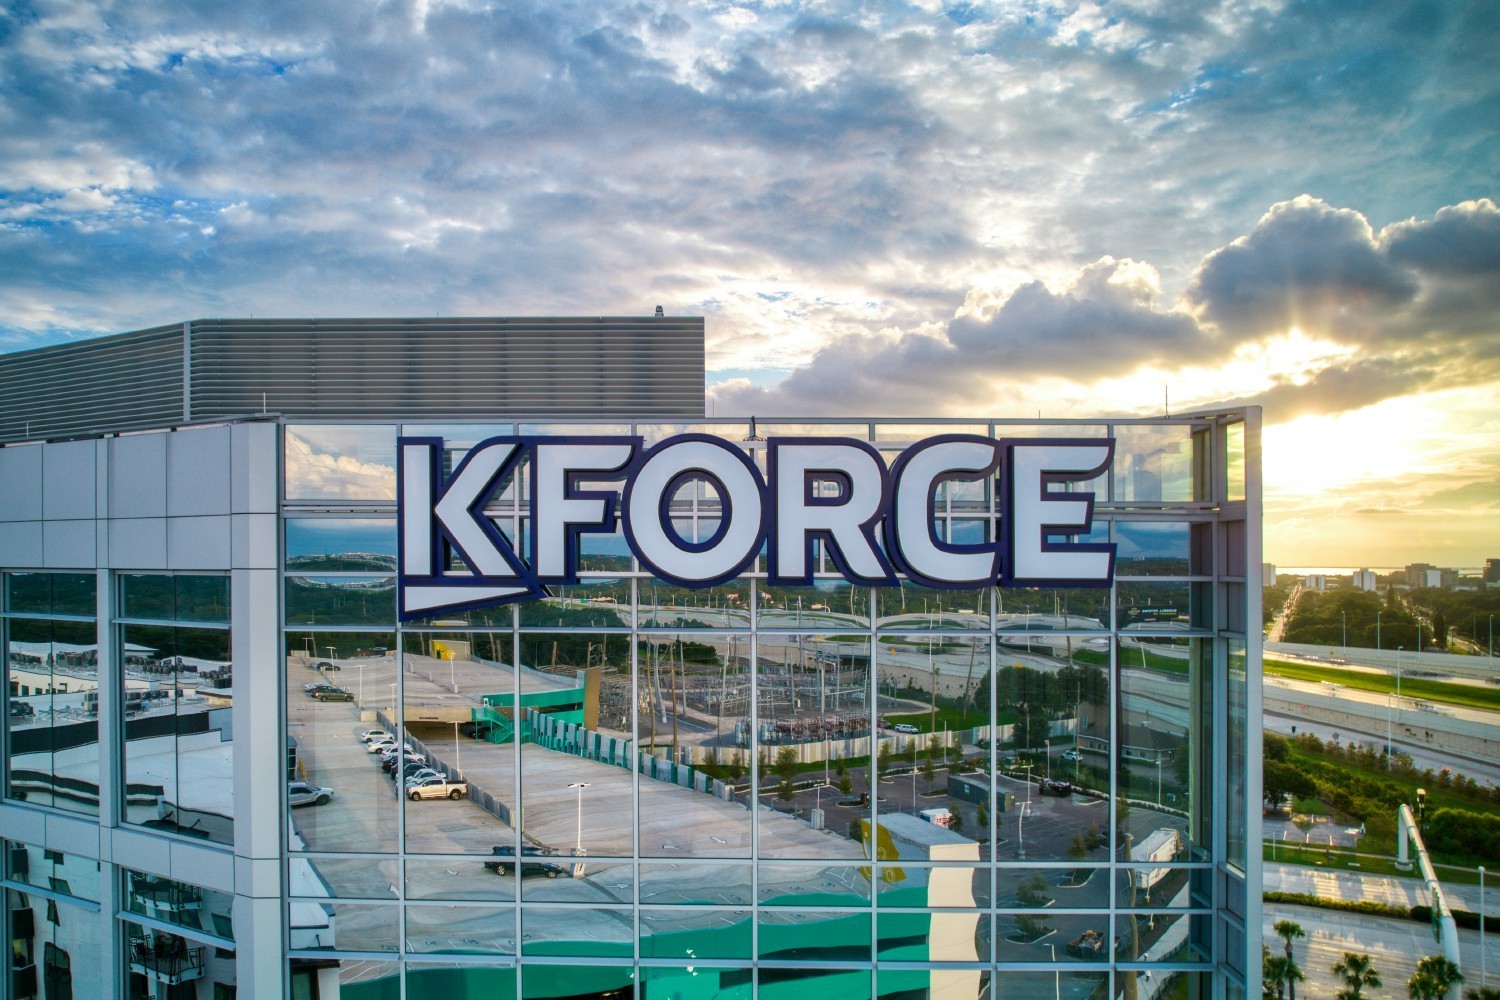 Kforce's new state-of-the-art headquarters office in Tampa, Florida. The firm occupies the fifth floor of Midtown West. 